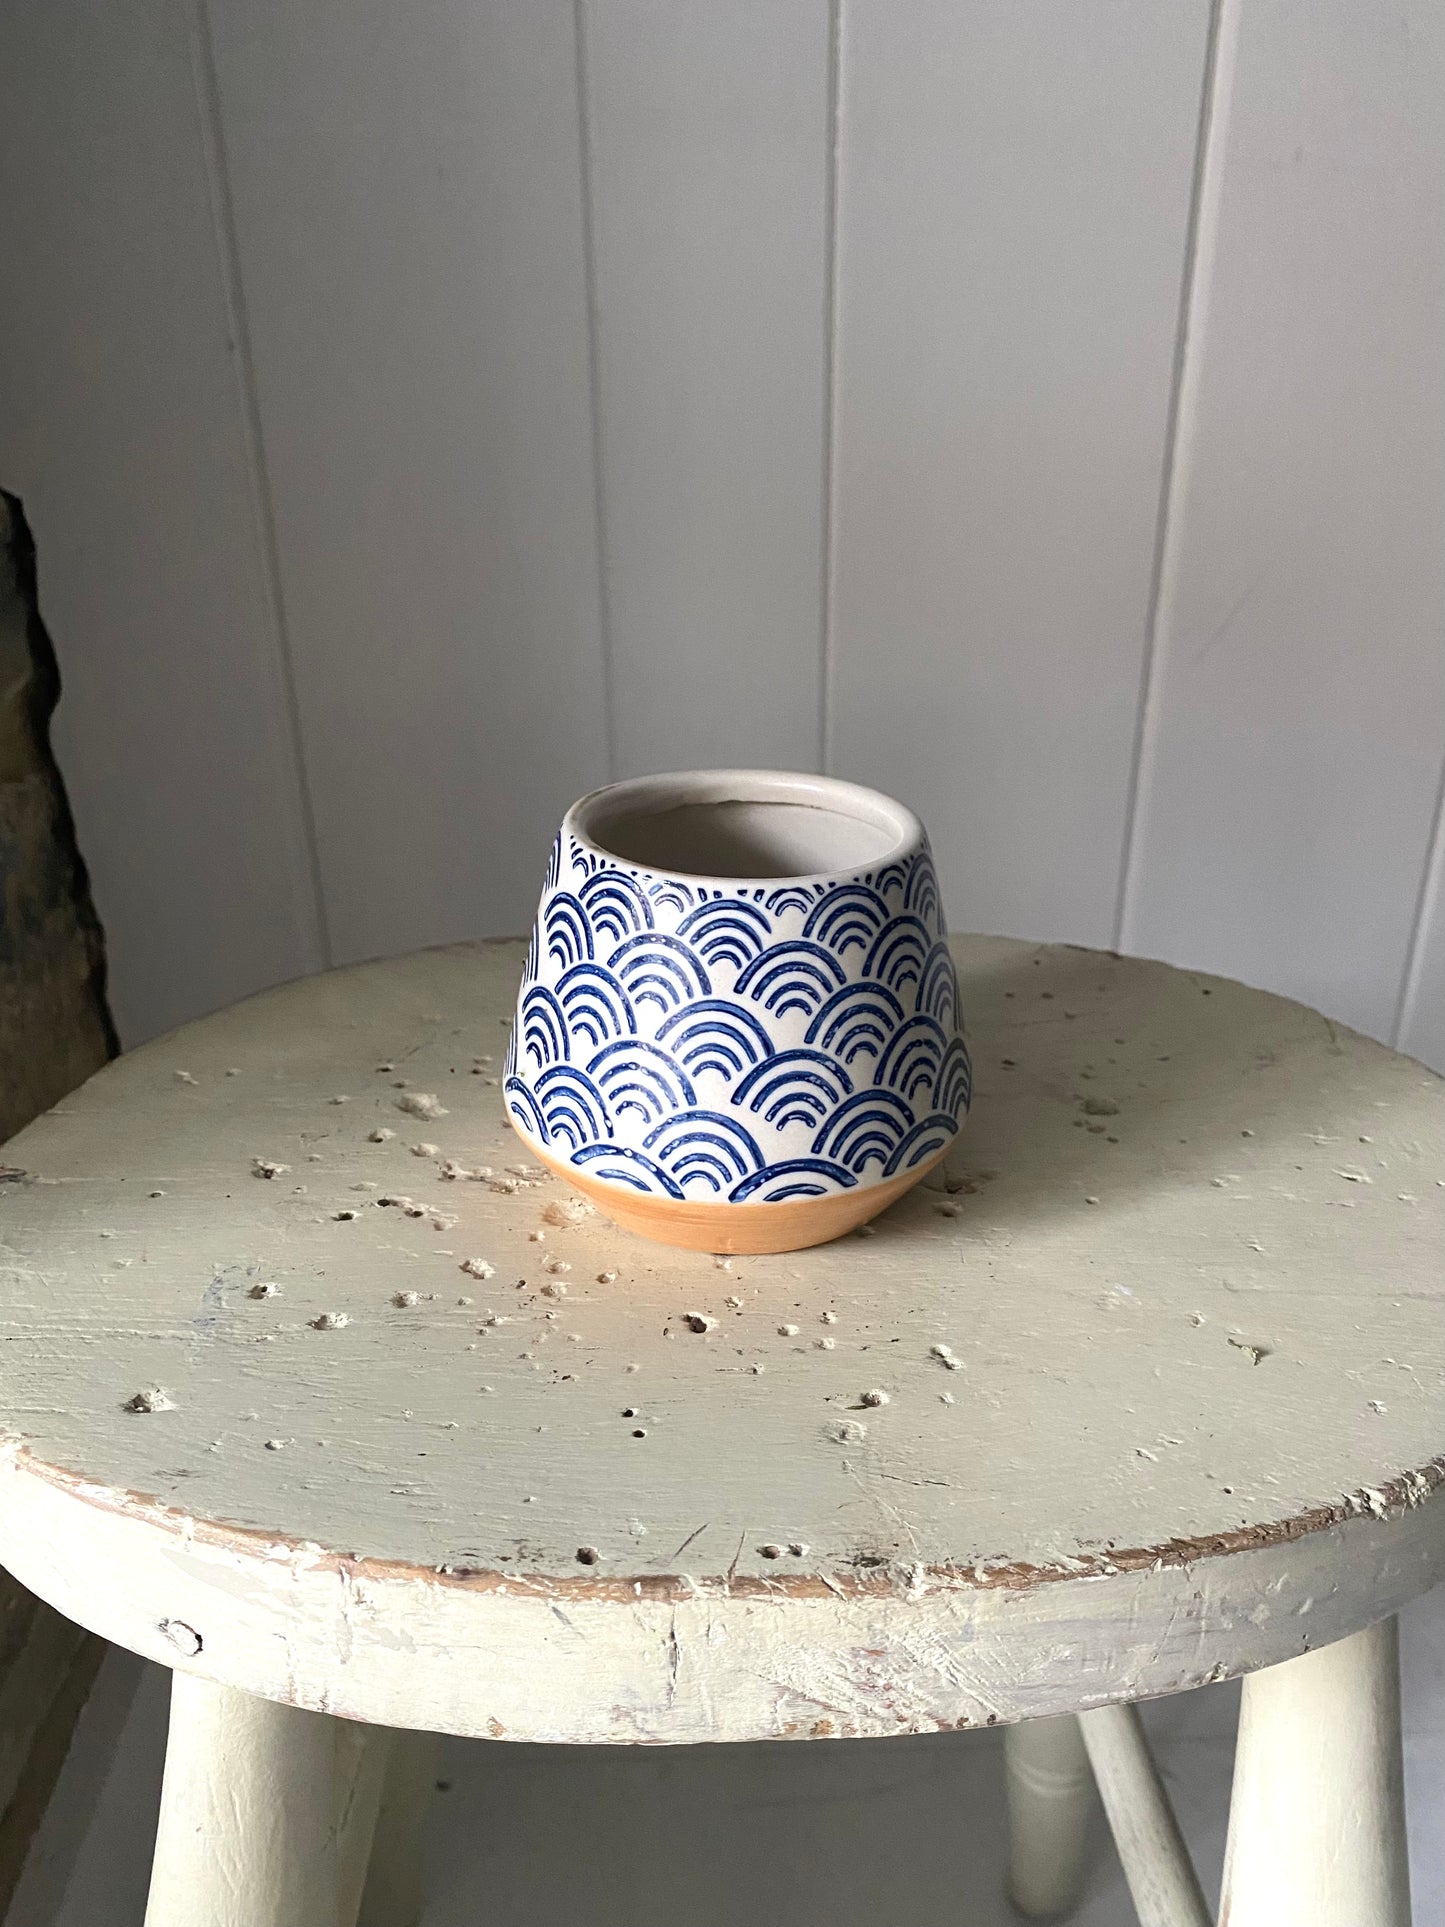 Blue and white ceramic pot, planted with a Hyacinth bulb